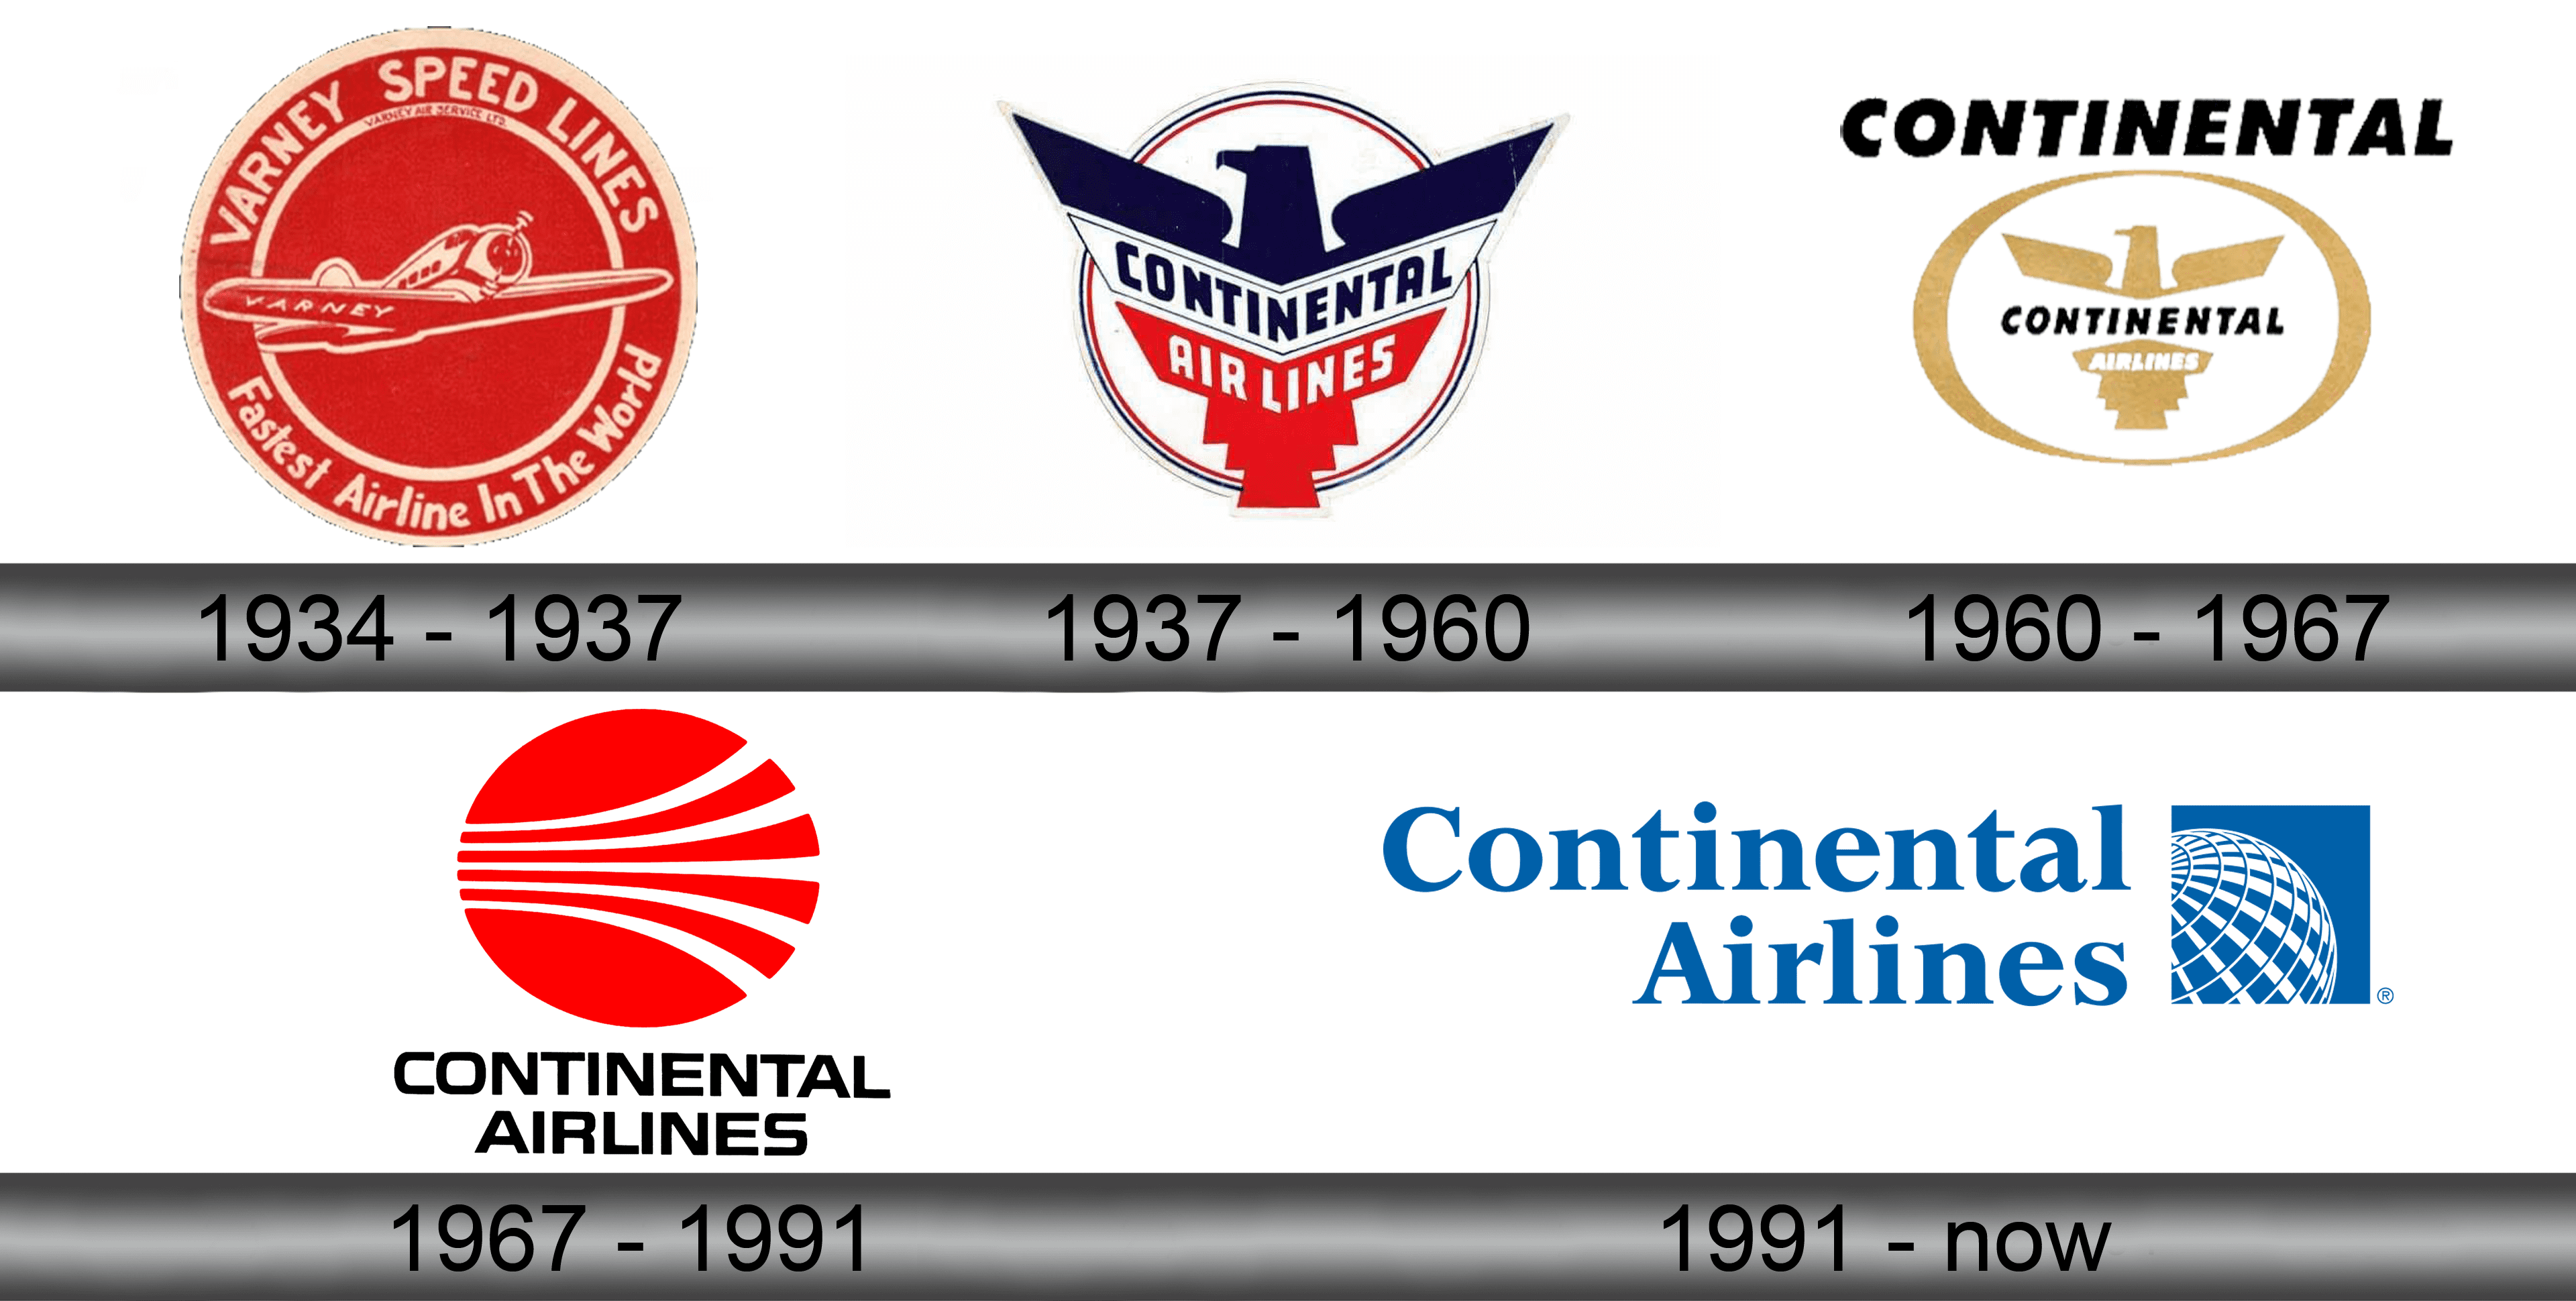 Continental Airlines logo download in SVG vector format or in PNG ...